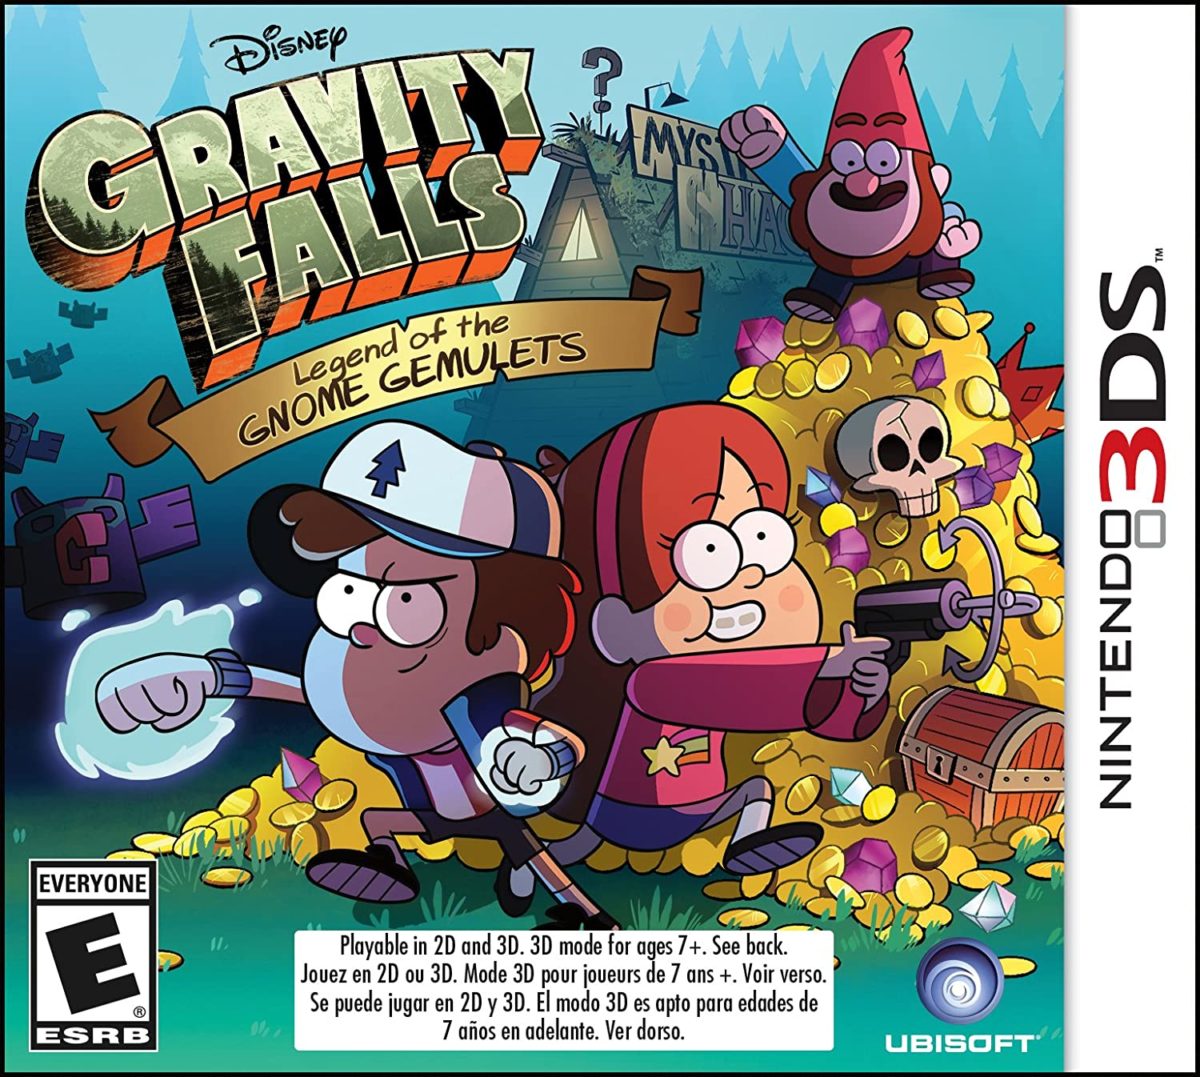 Gravity Falls: Legend of the Gnome Gemulets player count stats